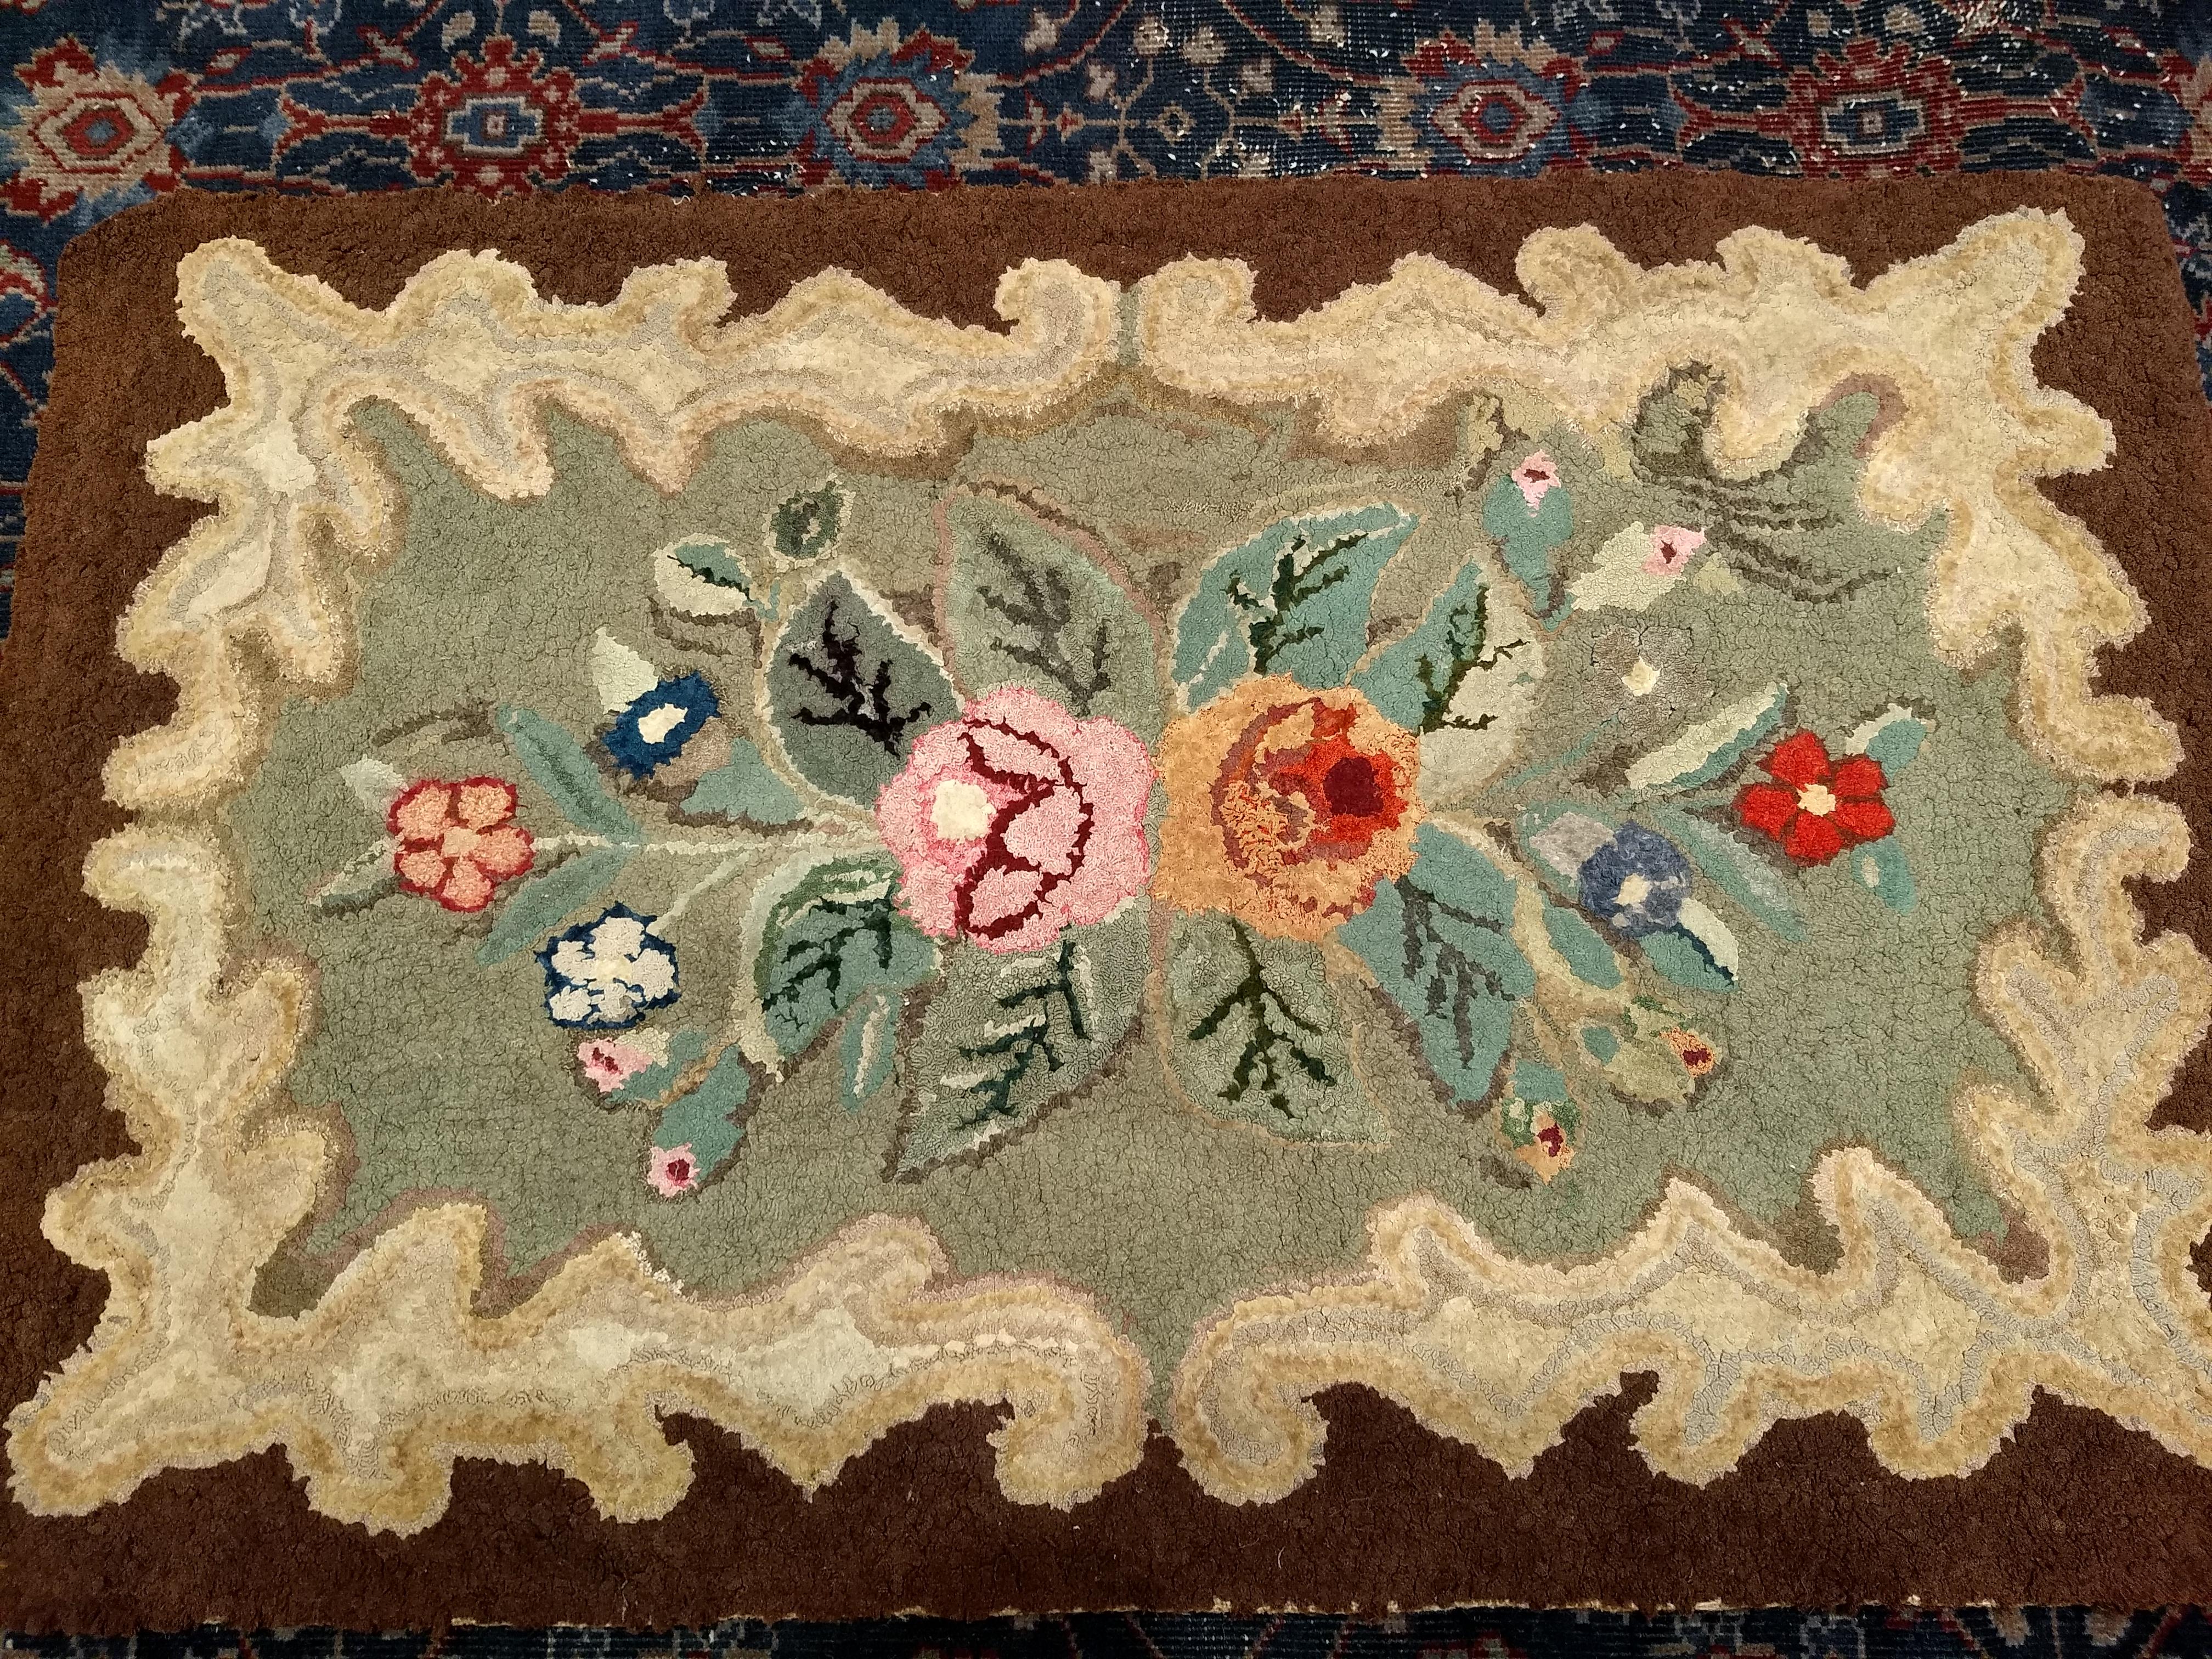 Hand-Crafted Early American Hand Hooked Rug with a Floral Pattern Wall Art For Sale